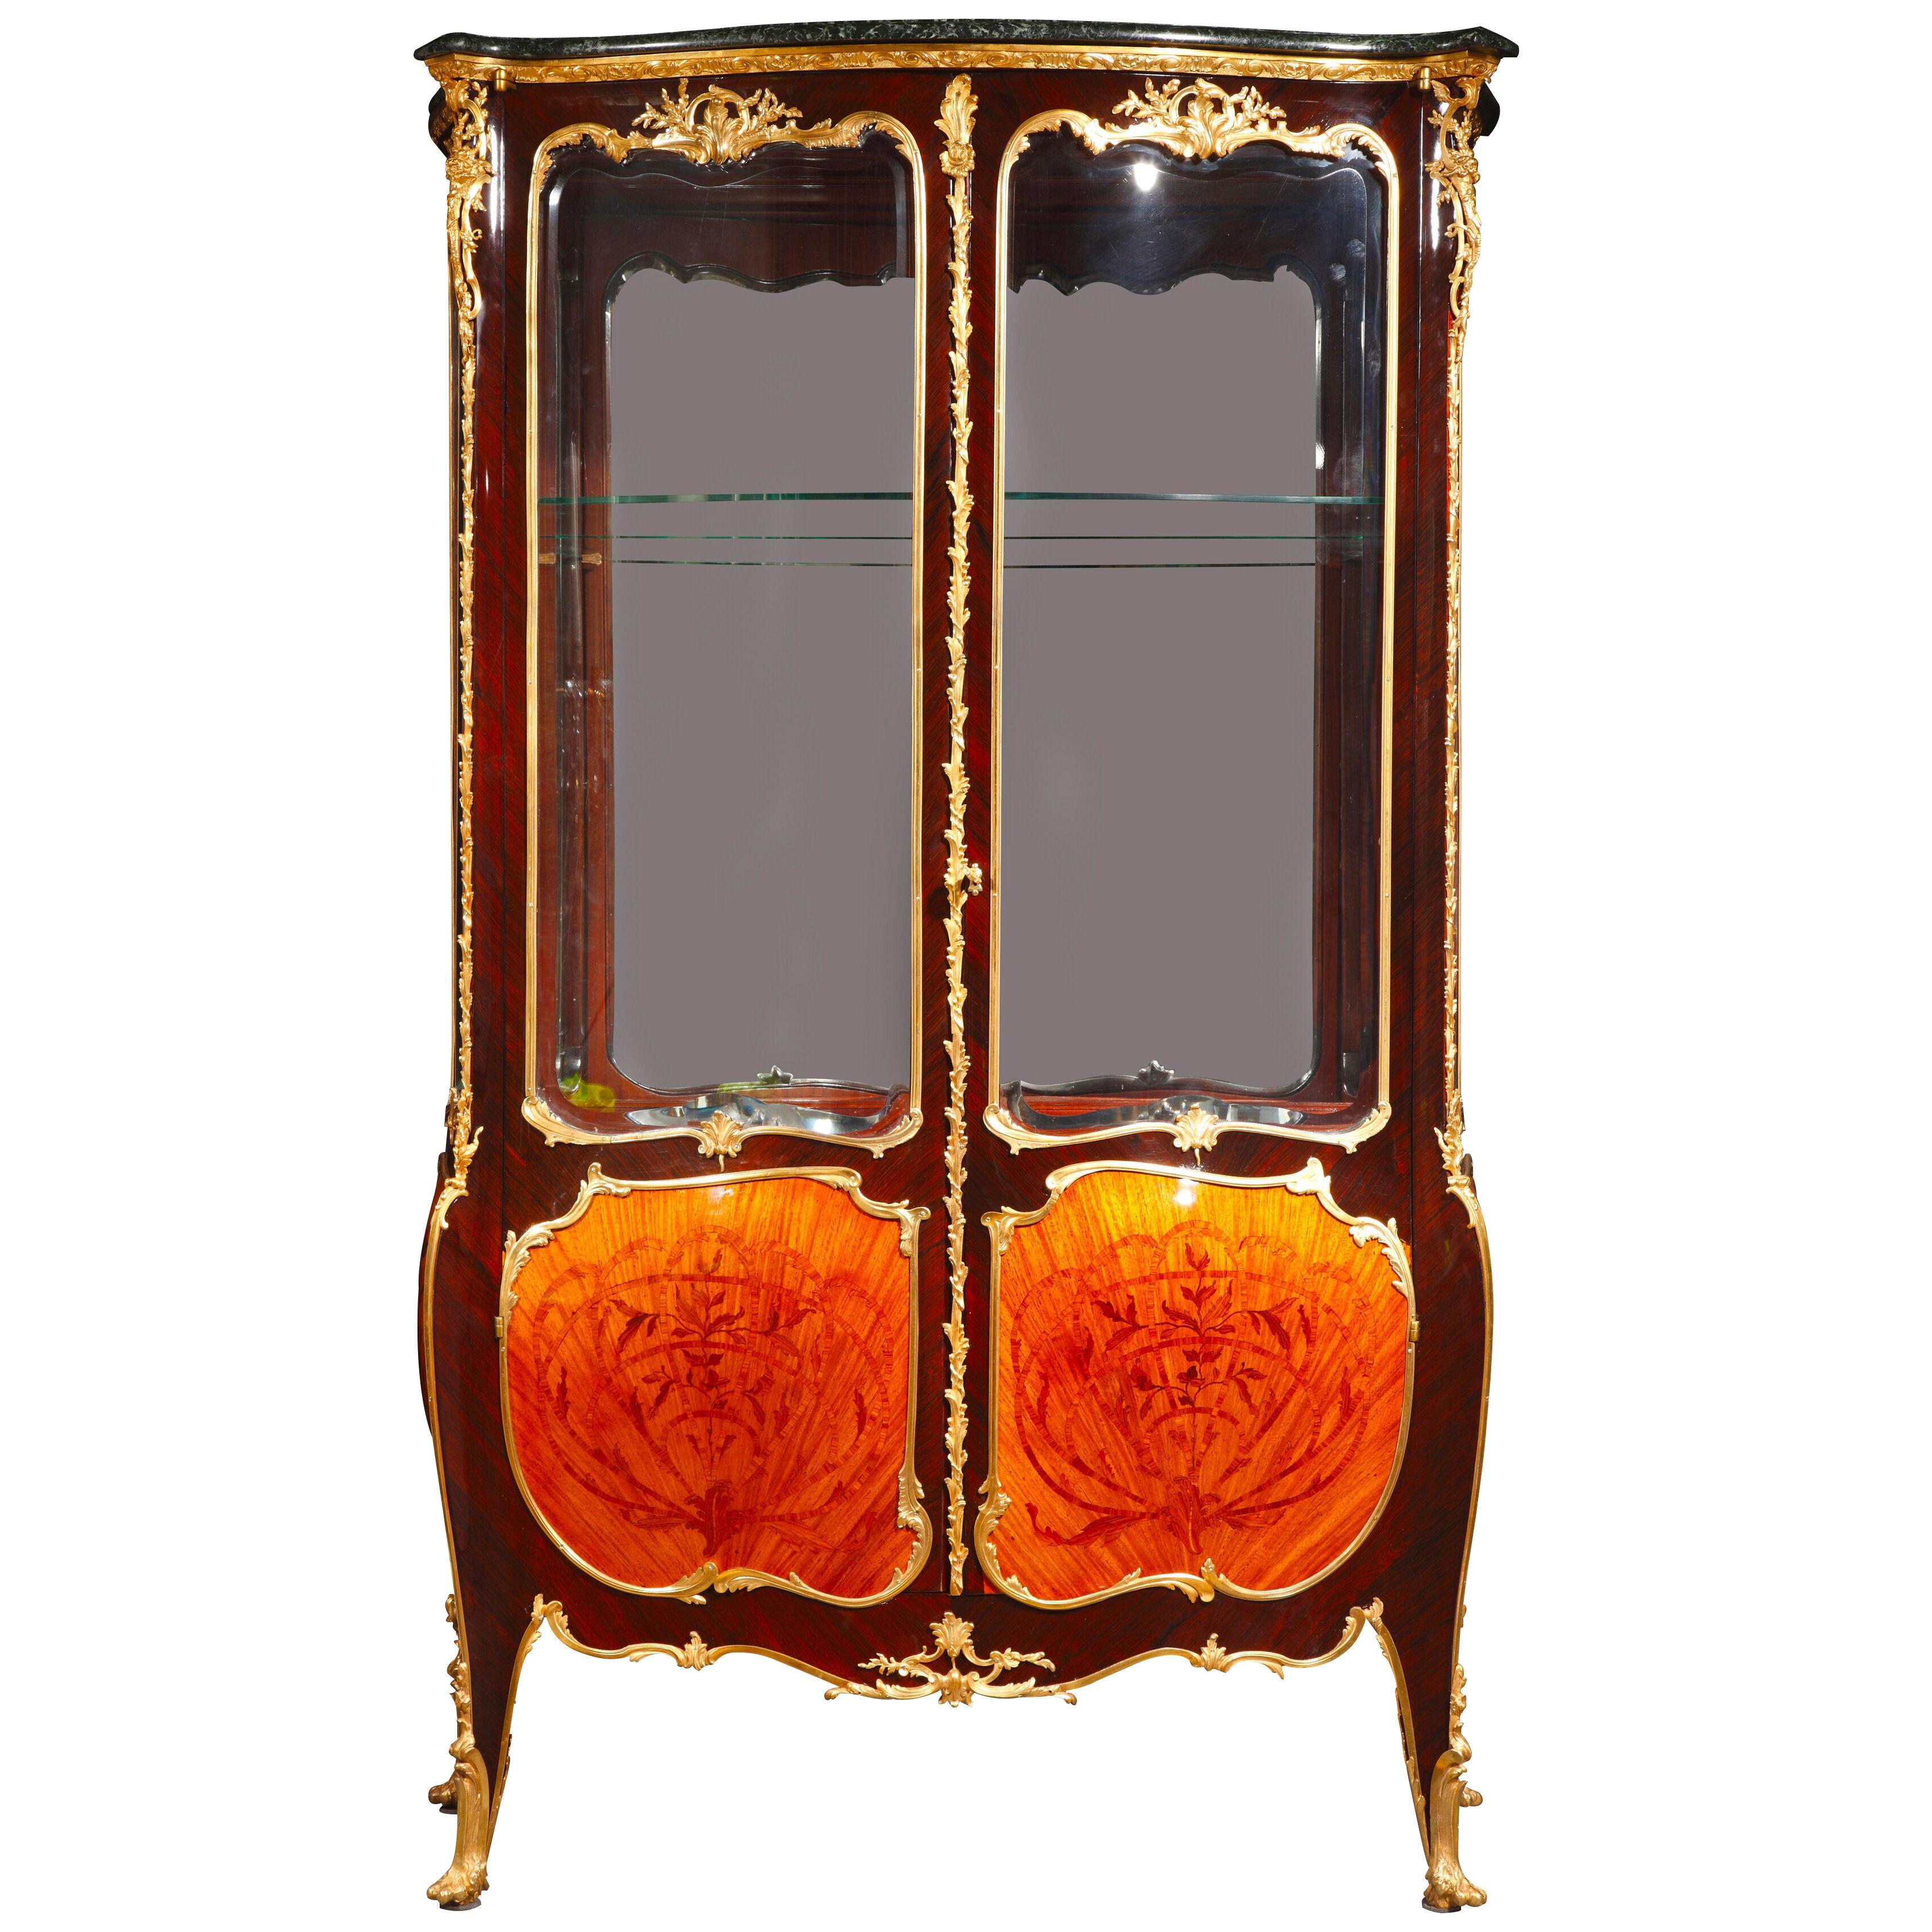 Vitrine Attributed to J.E. Zwiener and L. Messagé, France, Circa 1890